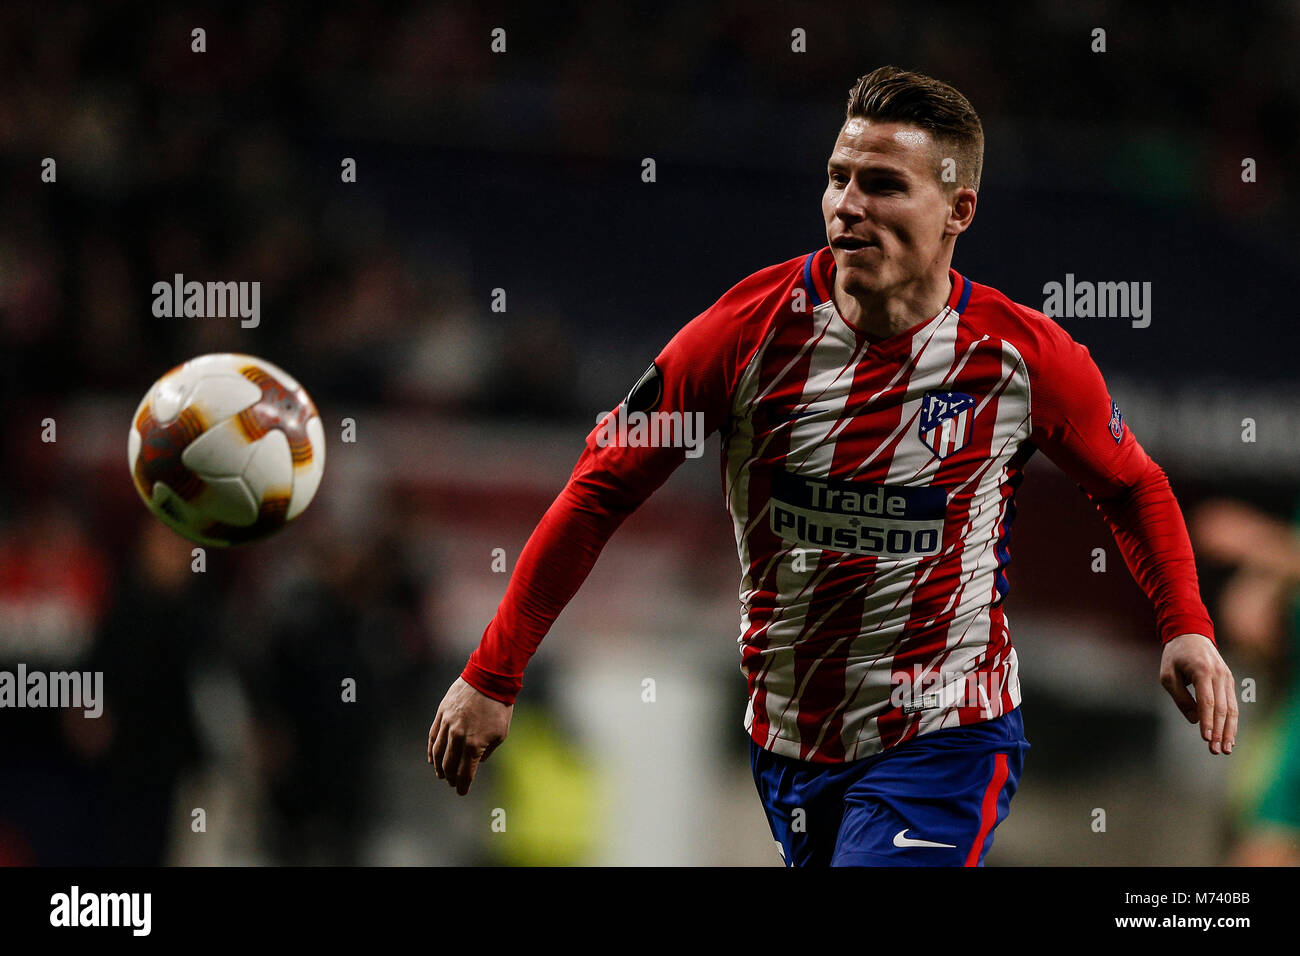 Madrid, Spain. 8th Mar, 2018. Kevin Gameiro (Atletico de Madrid) in action during the match UEFA Europa League match between Atletico de Madrid vs Lokomotiv Moscu at the Wanda Metropolitano stadium in Madrid, Spain, March 8, 2018. Credit: Gtres Información más Comuniación on line, S.L./Alamy Live News Stock Photo